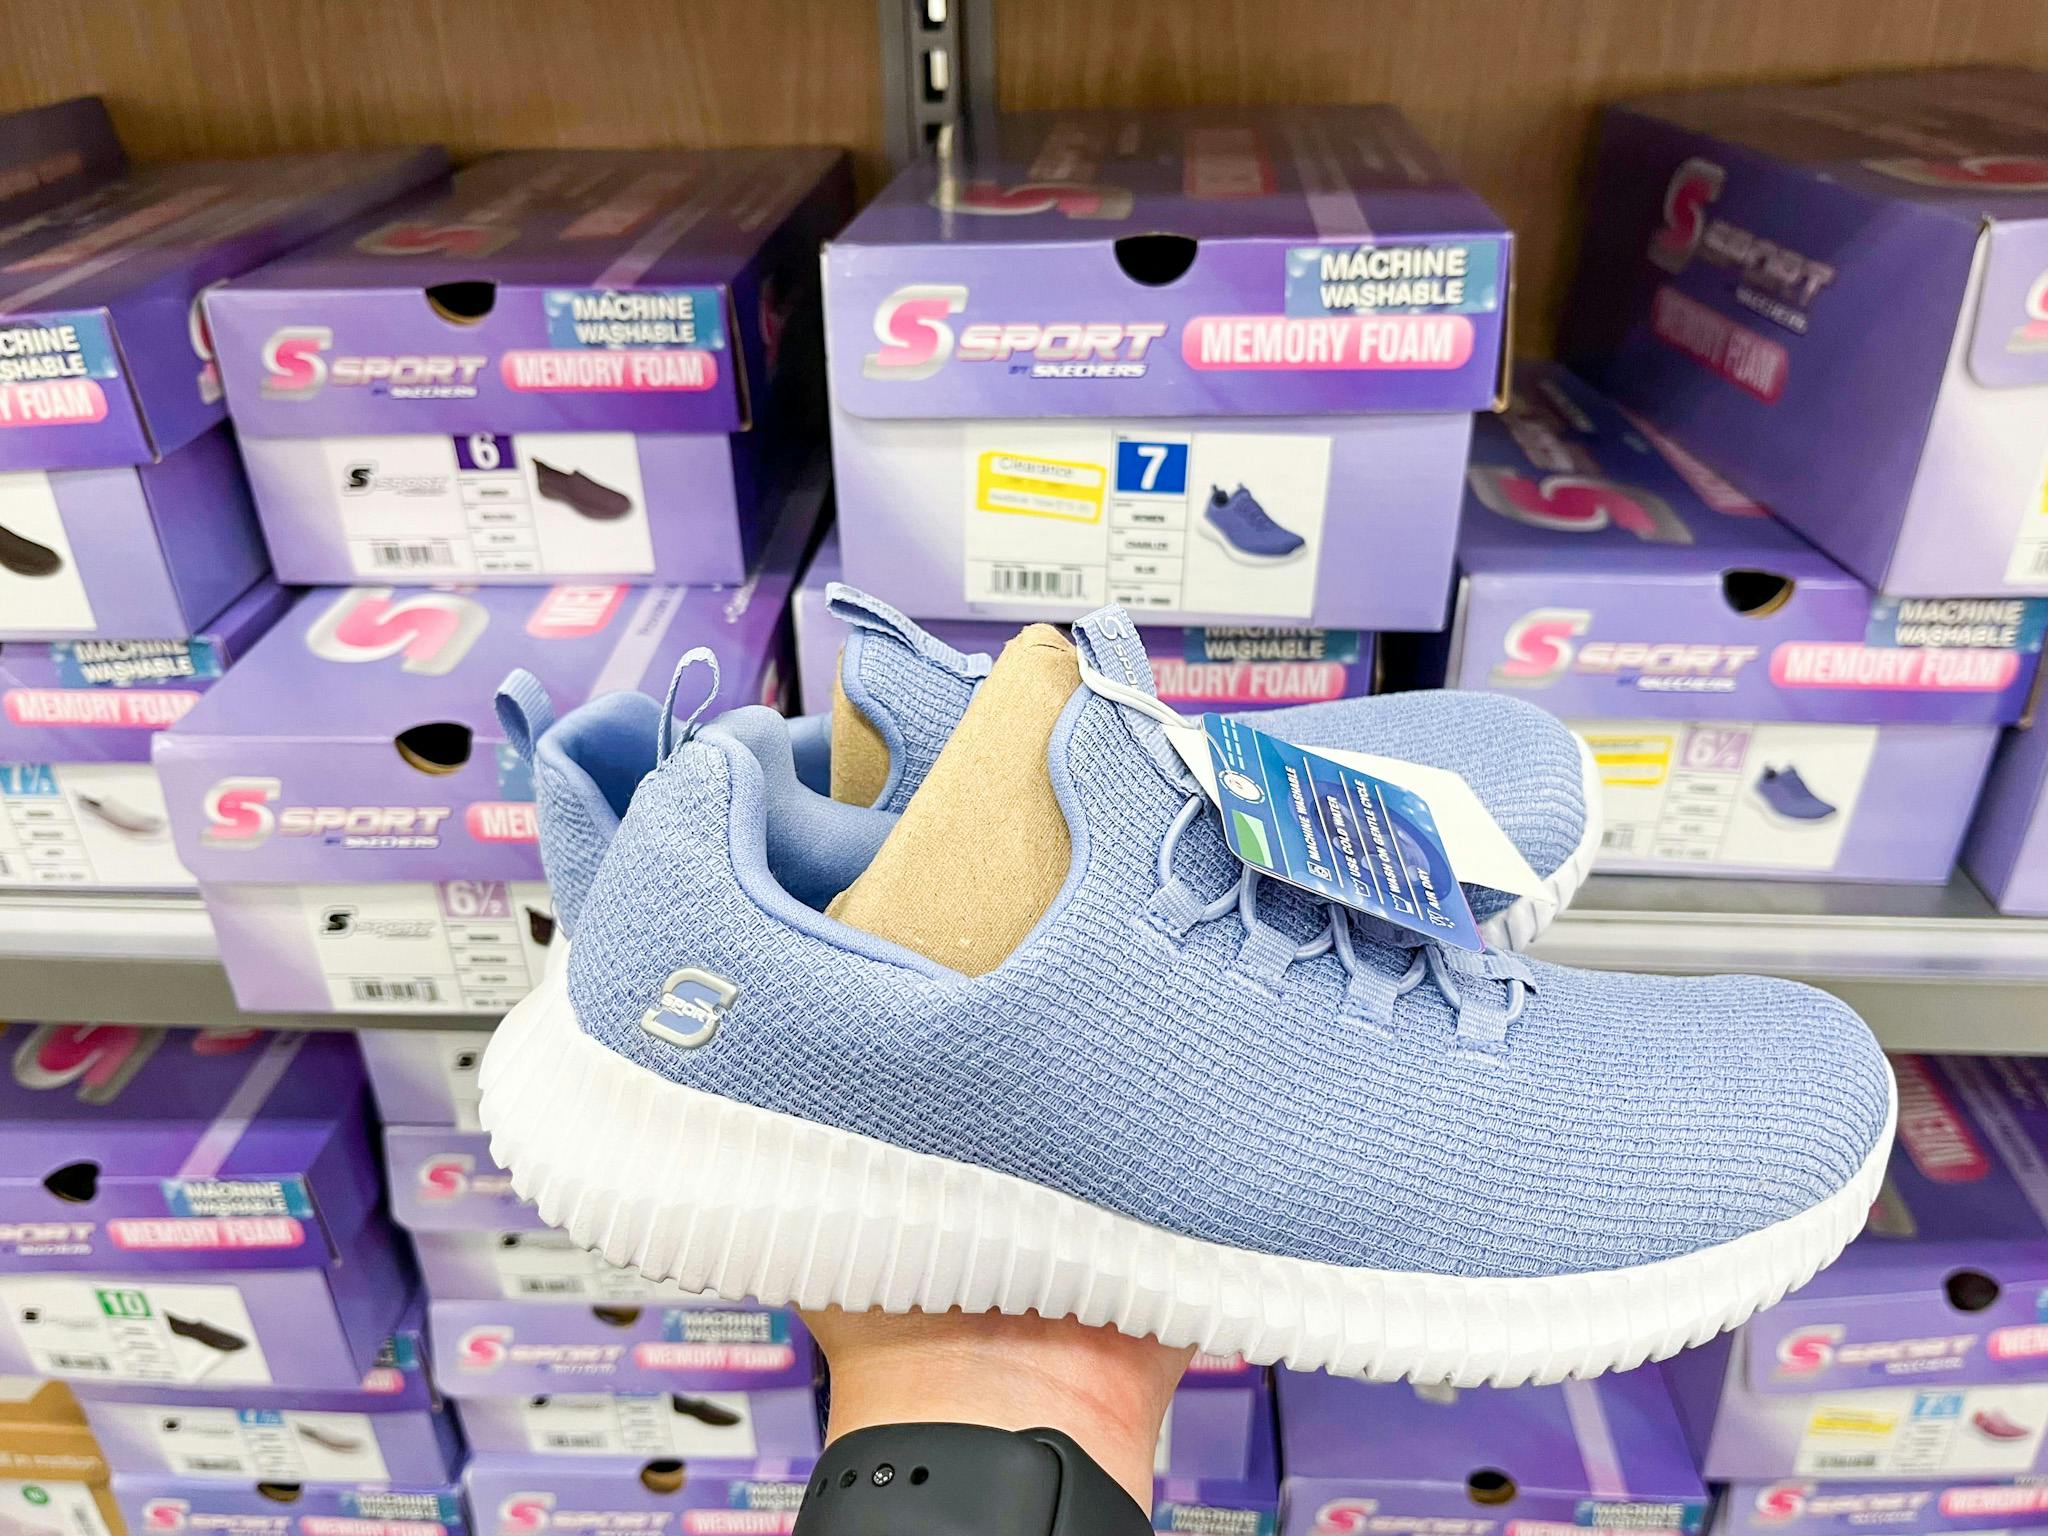 skechers shoes at target